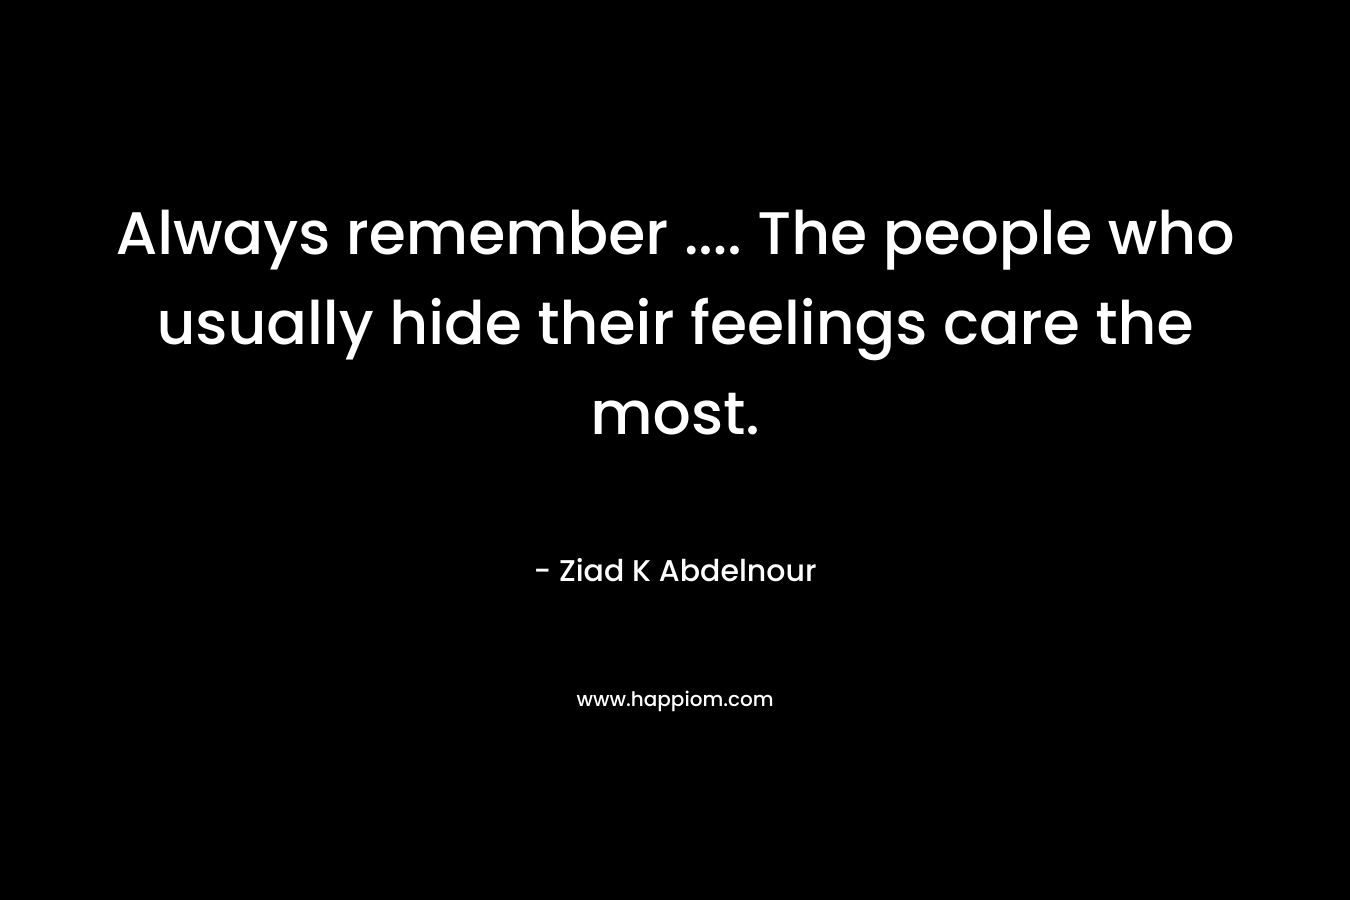 Always remember .... The people who usually hide their feelings care the most.